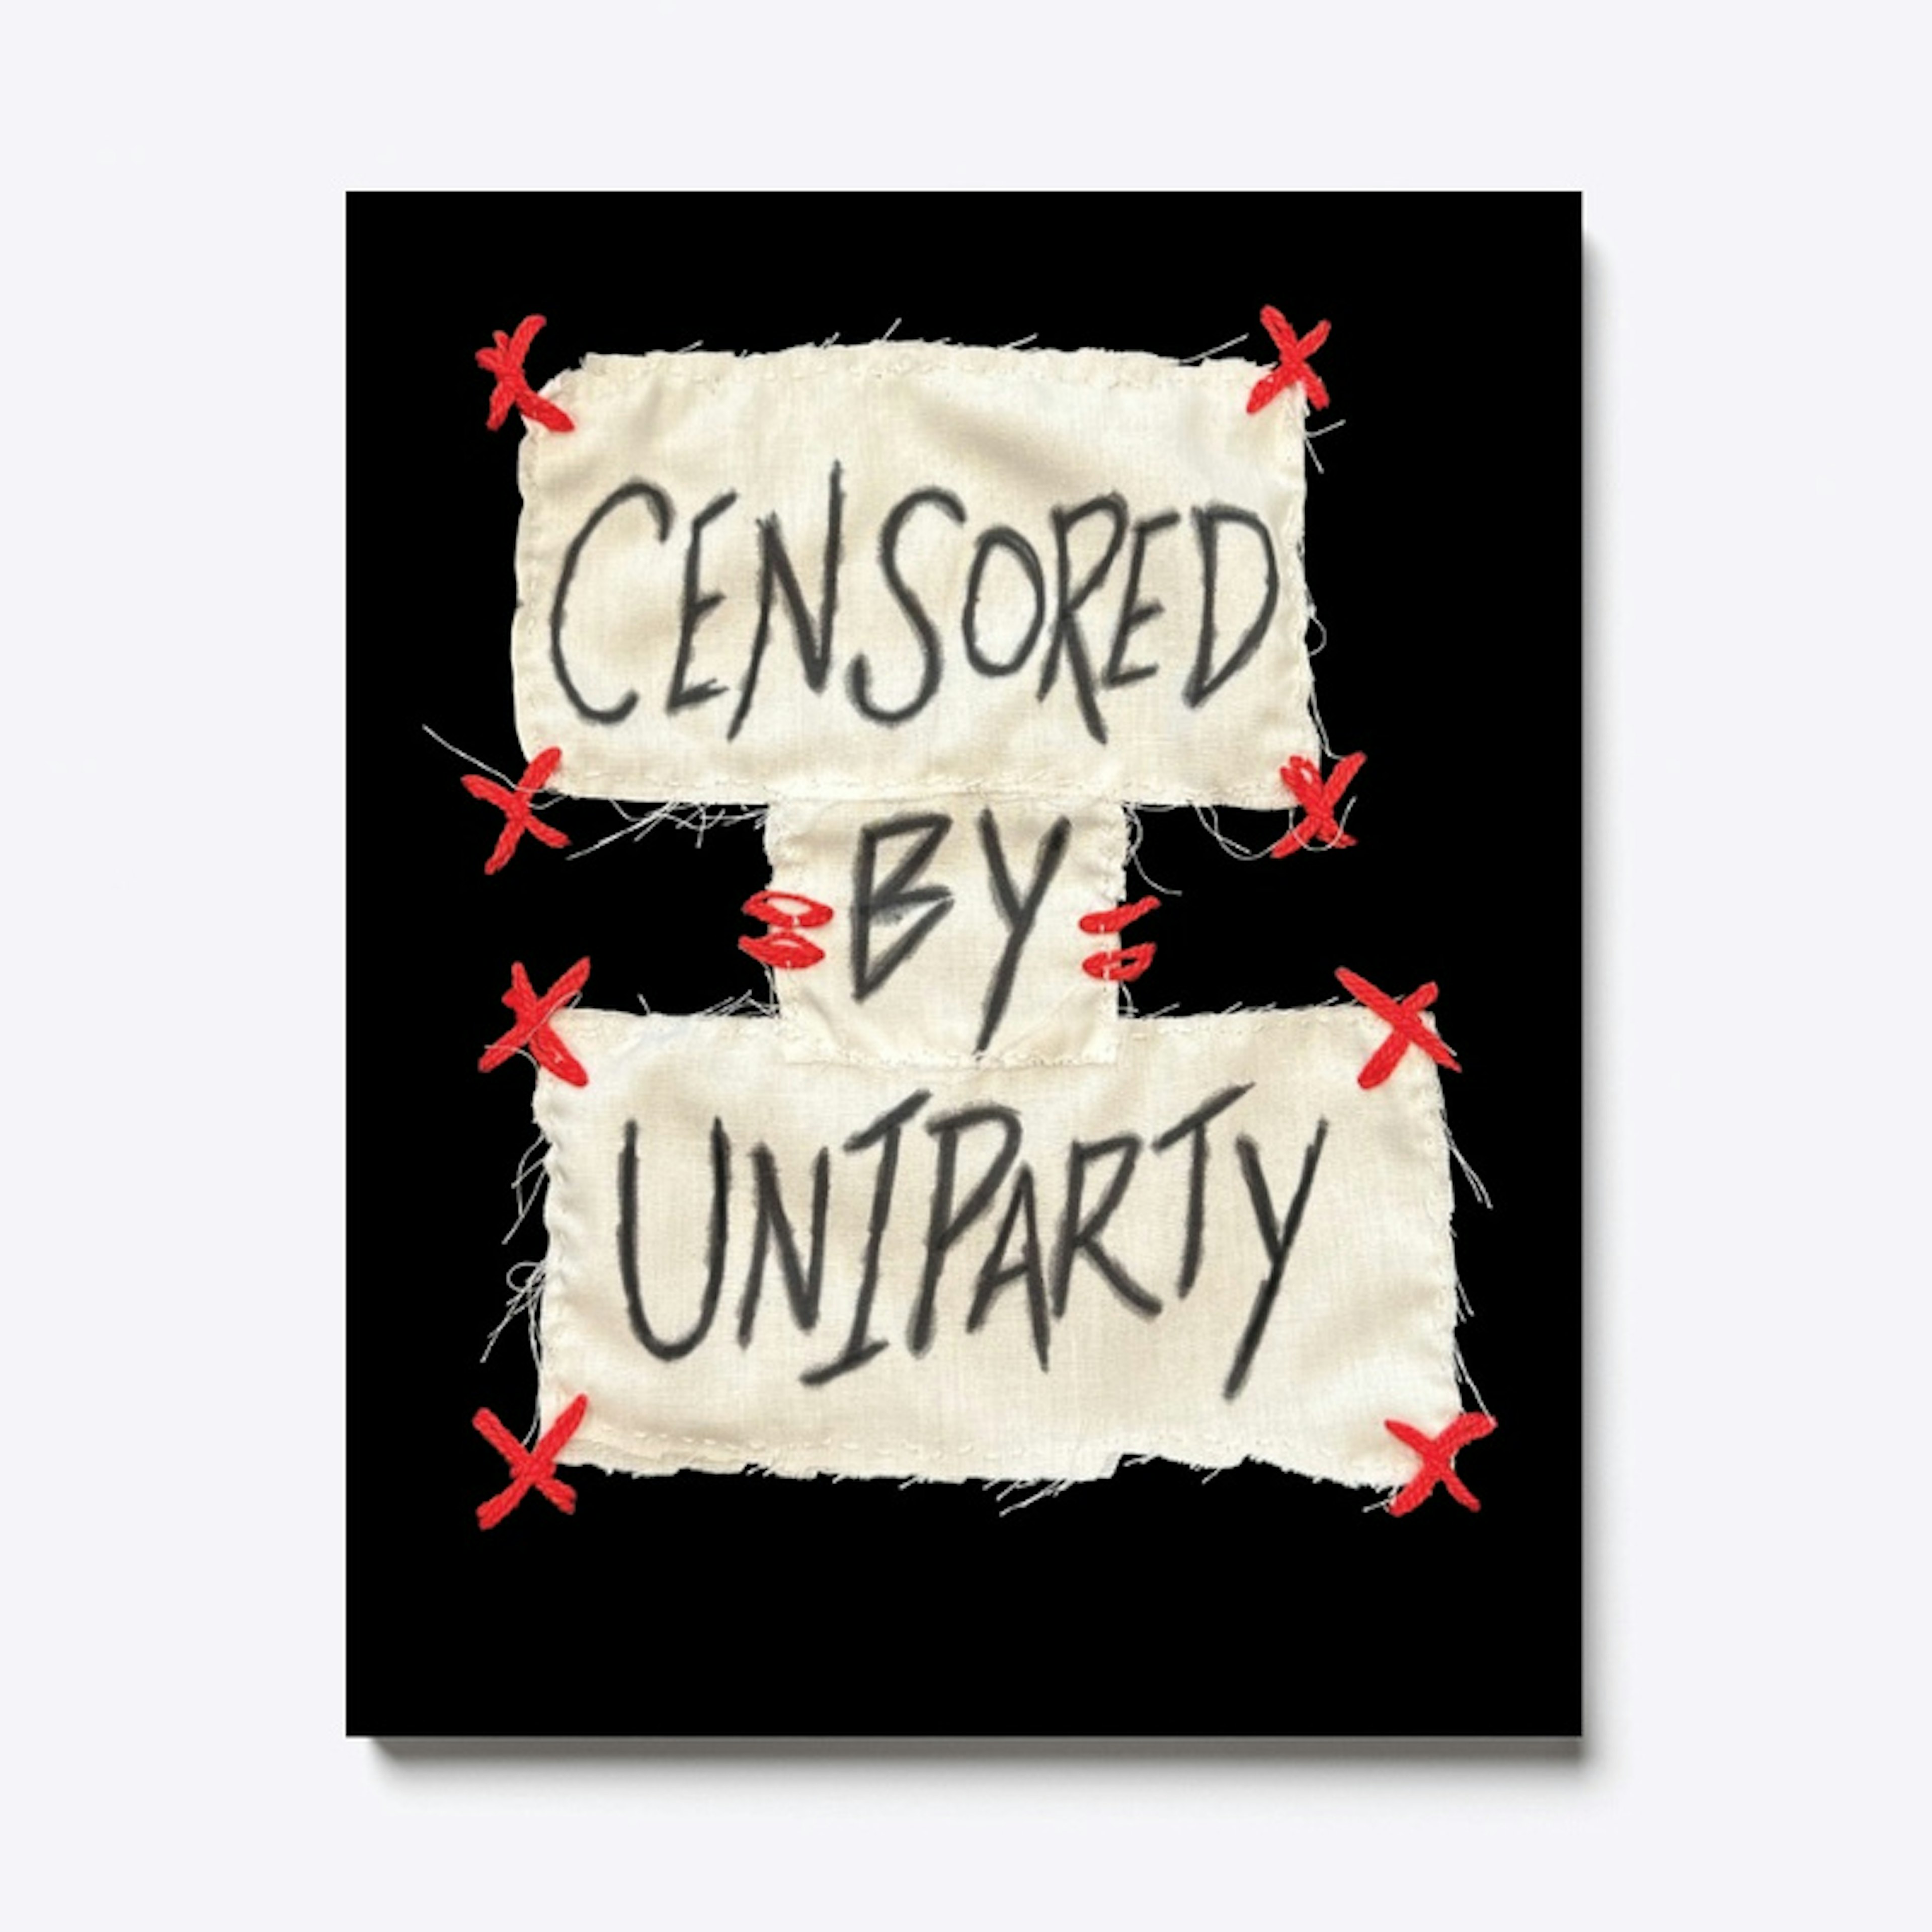 Censored By Uniparty